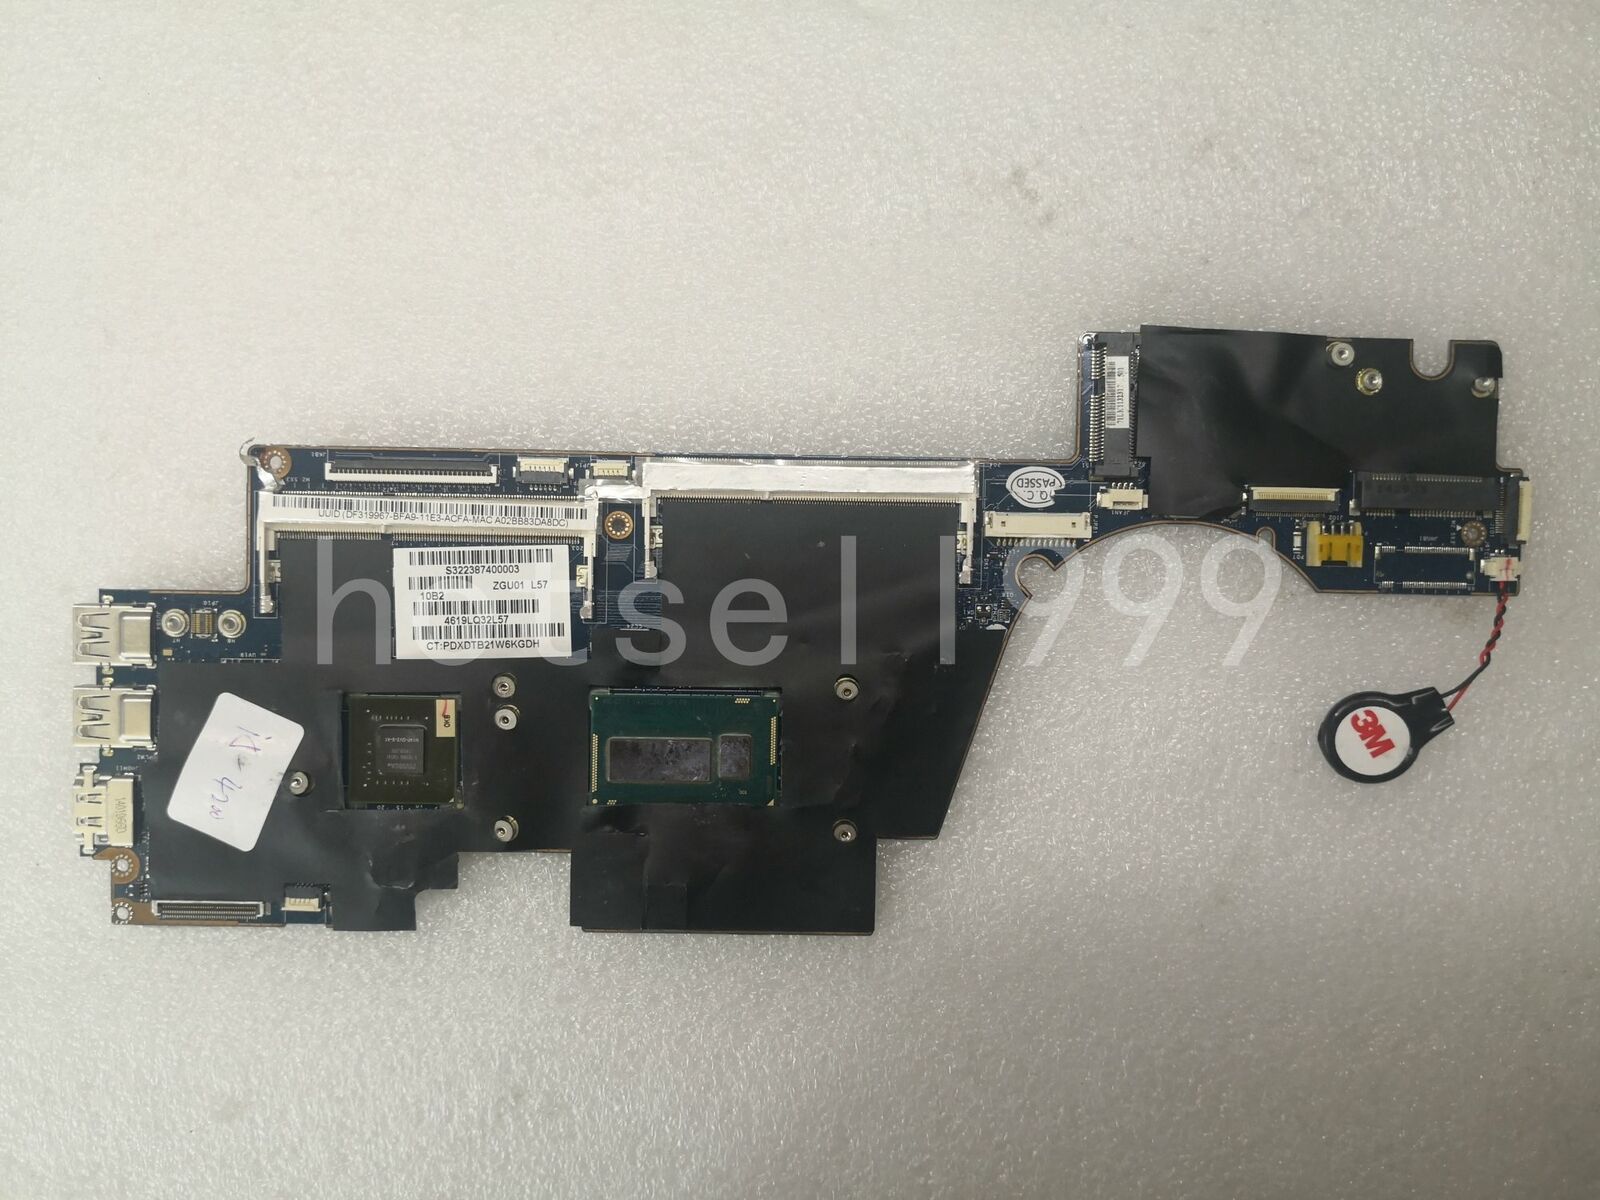 FOR HP ENVY TS 14-k130TX Laptop motherboard 744762-501 740M/2G I5-4200U fully Brand: HP Number of Memory S